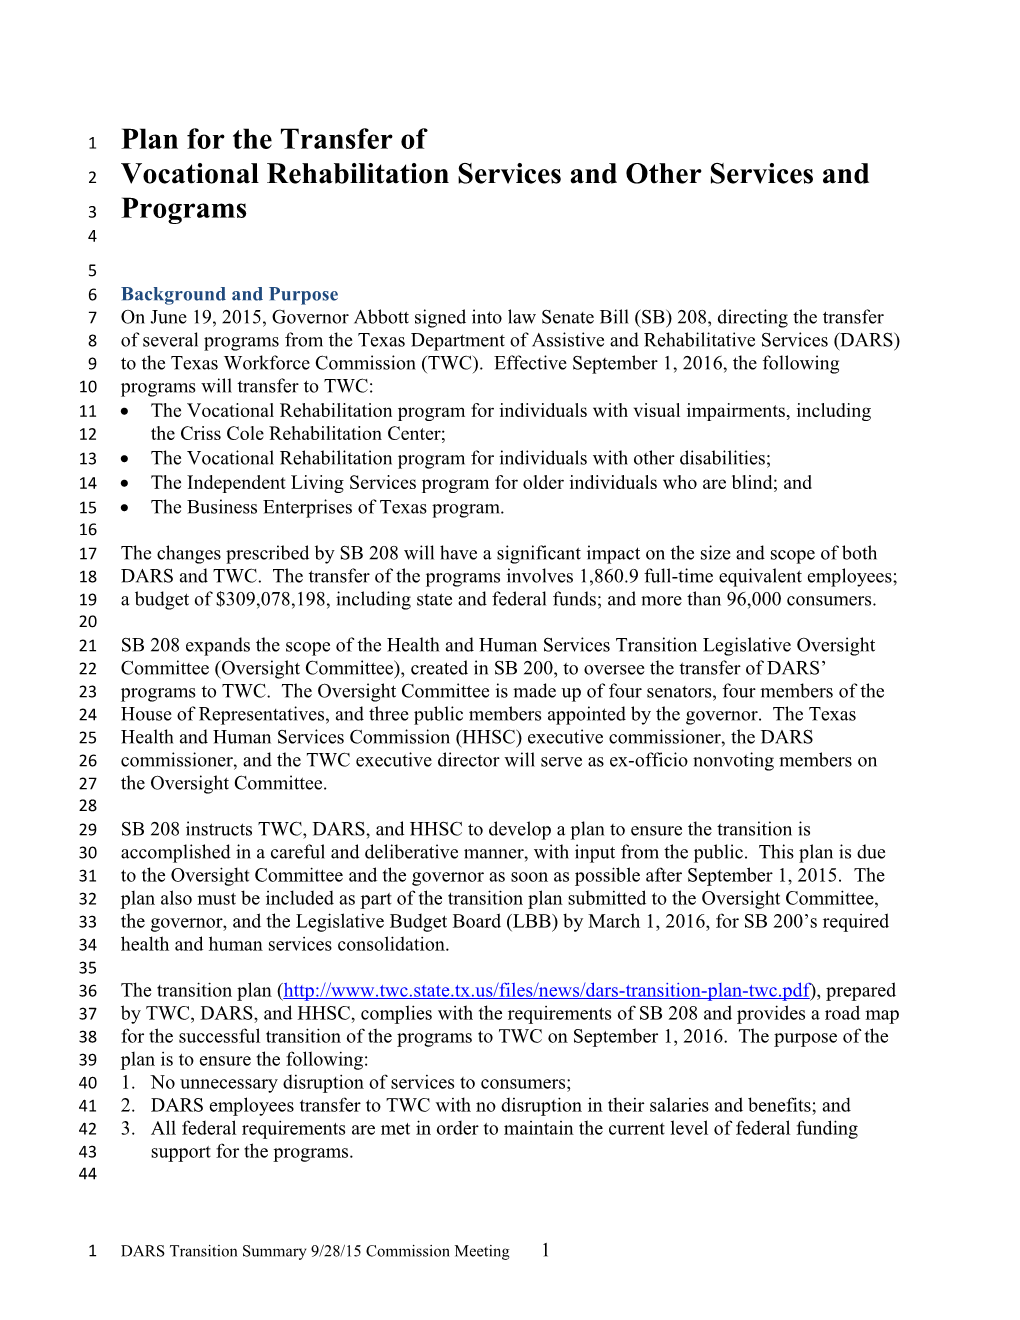 TWC Commission Meeting Materials September 28, 2015 - Transition Plan for Vocational